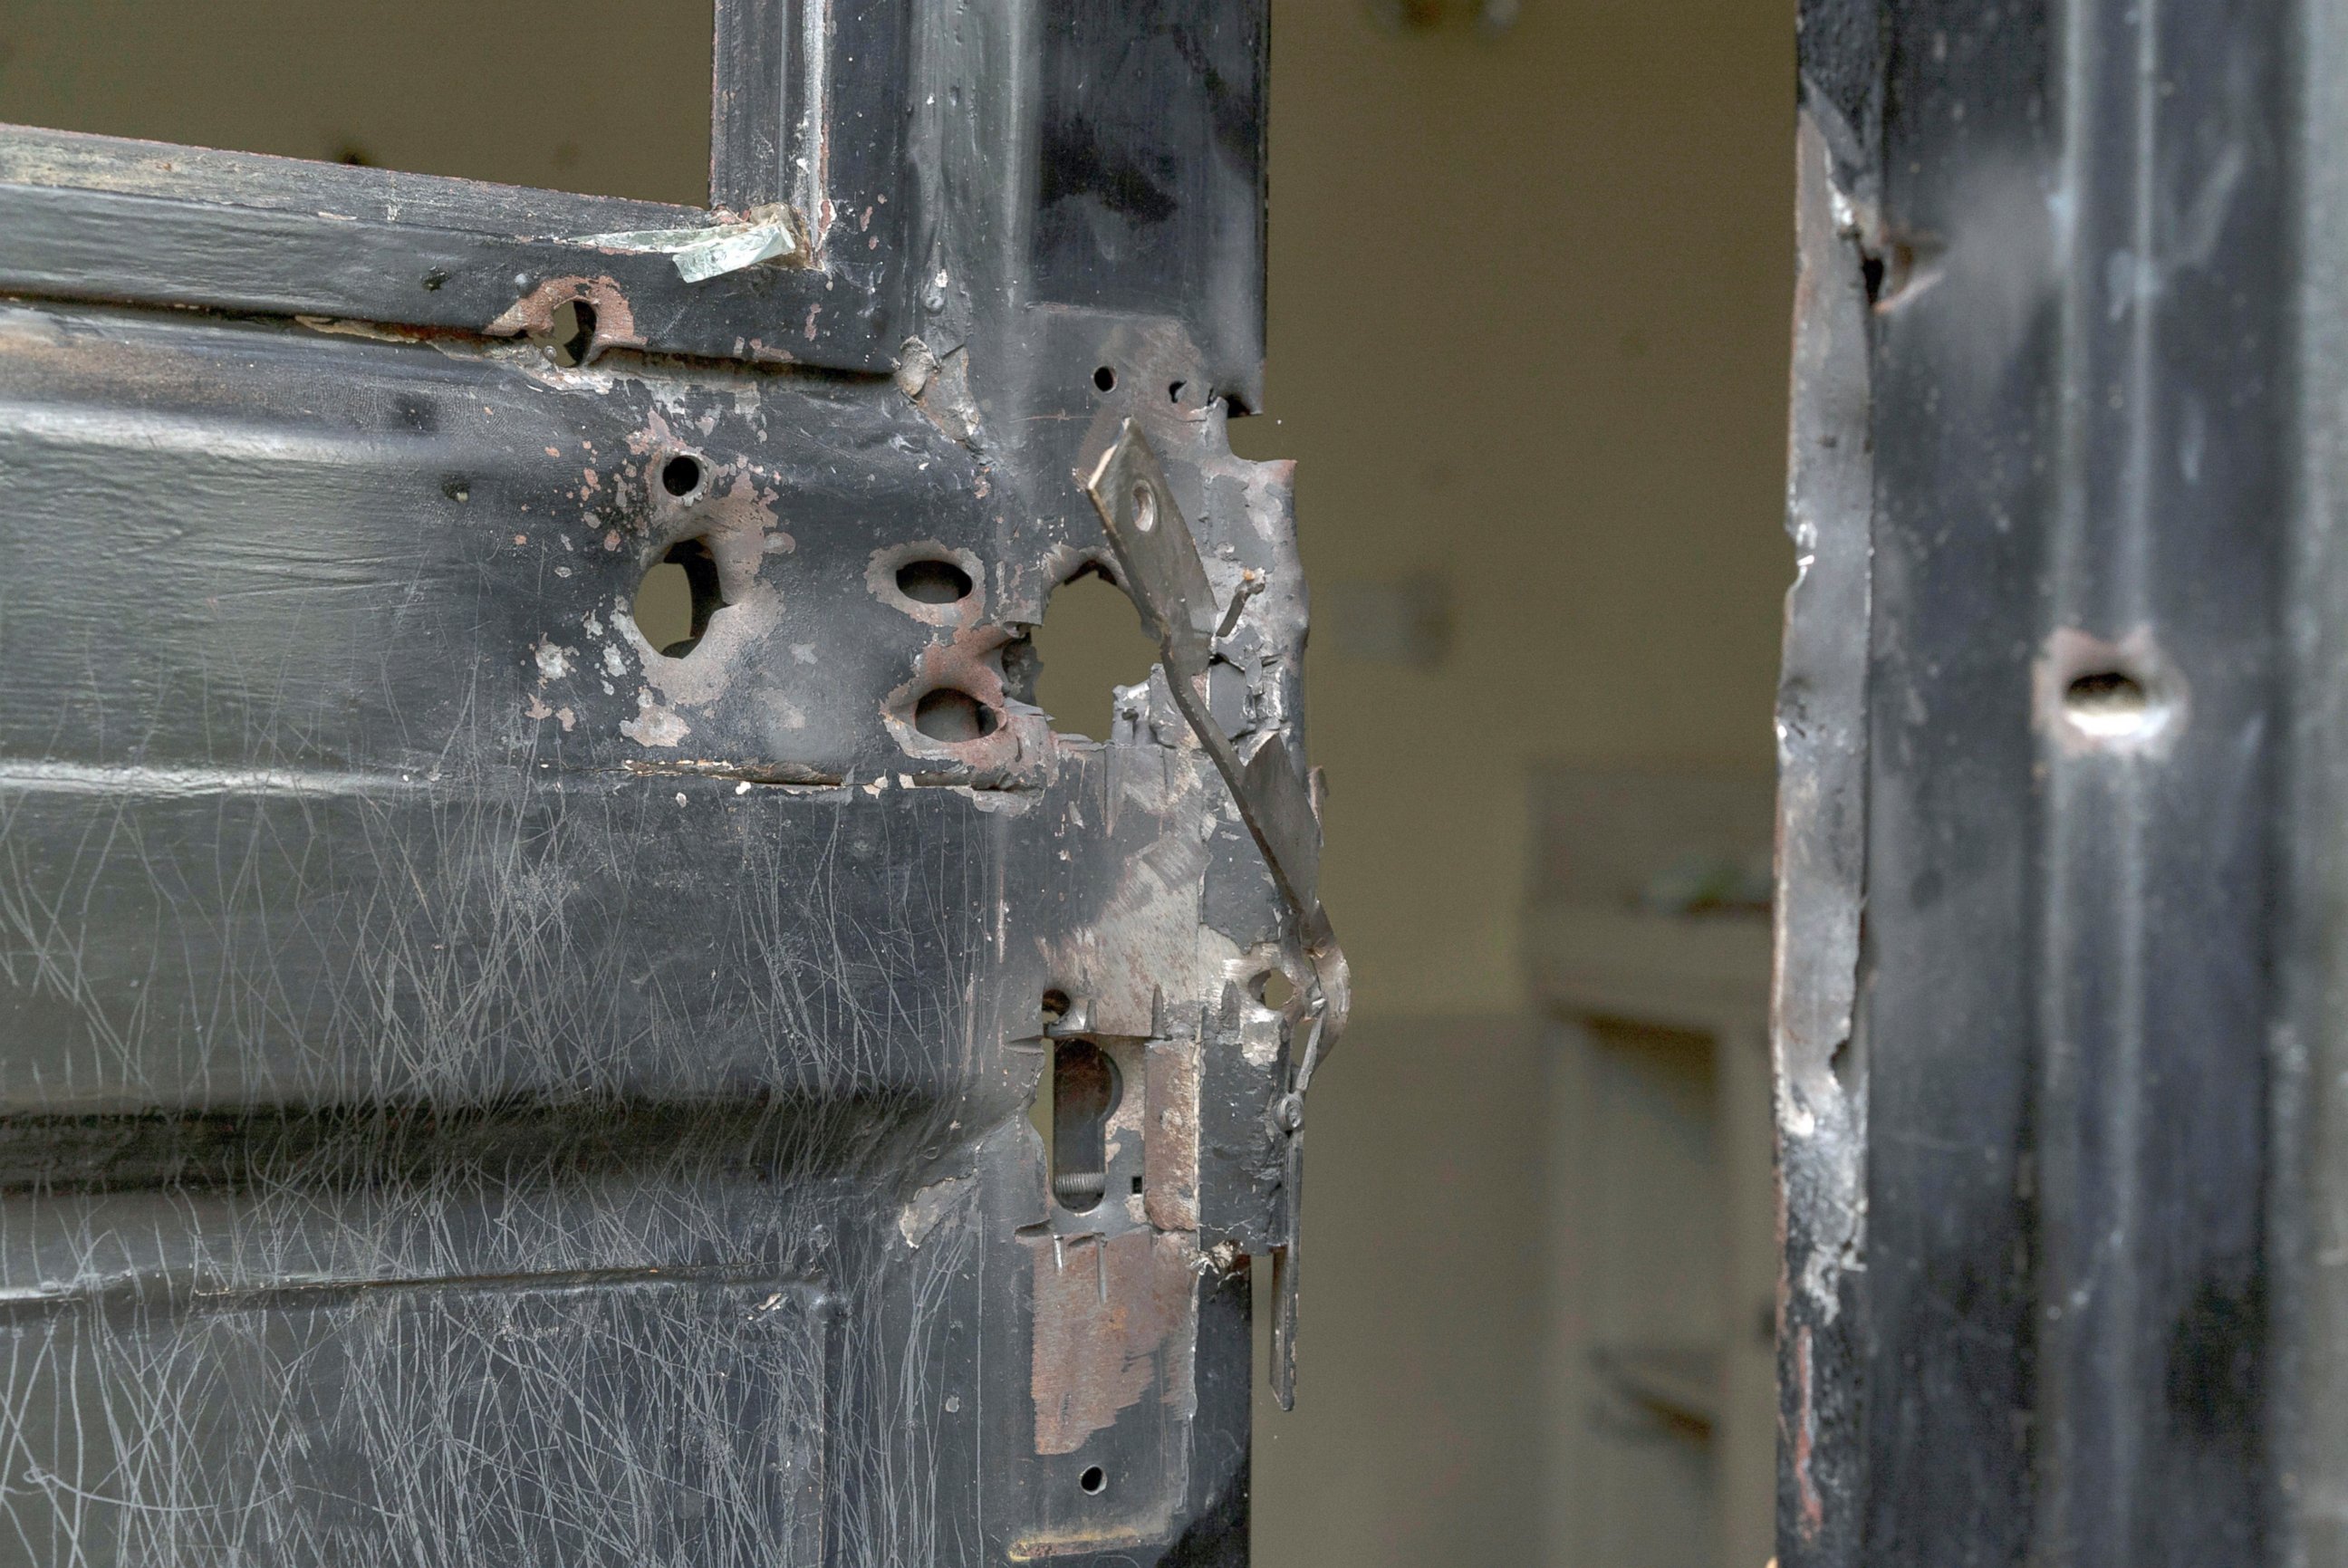 PHOTO: Bullet holes are seen in a metal door that was shot open at the Terrain compound after it was looted the previous month in the capital Juba, South Sudan, Aug. 3, 2016.